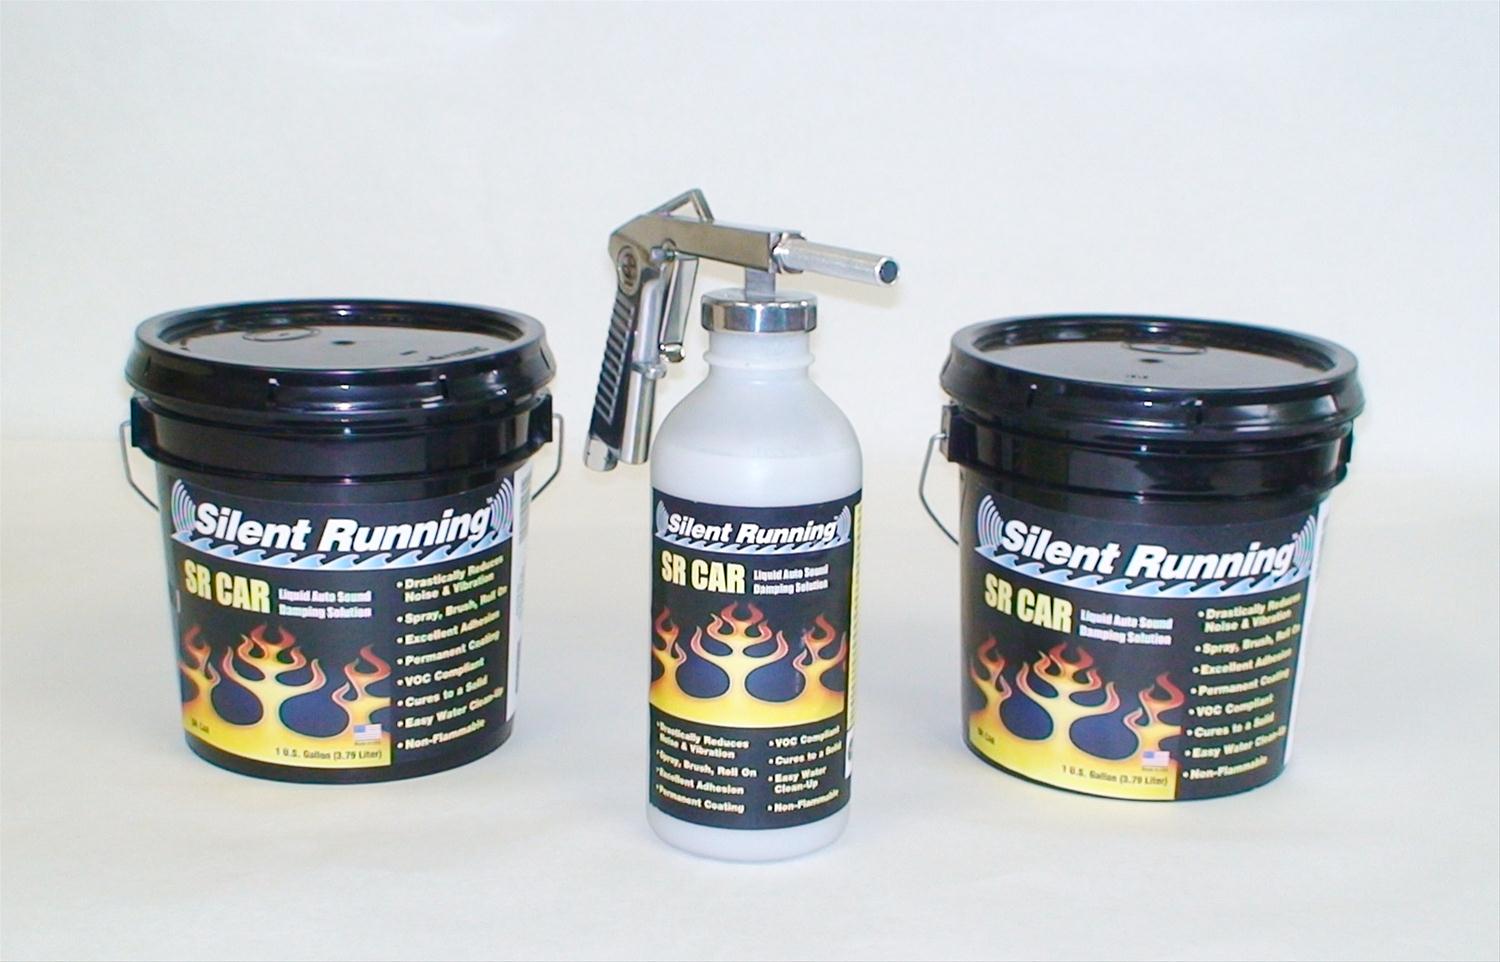 Silent Running SR CAR Sound Barrier and Thermal Insulation Kit